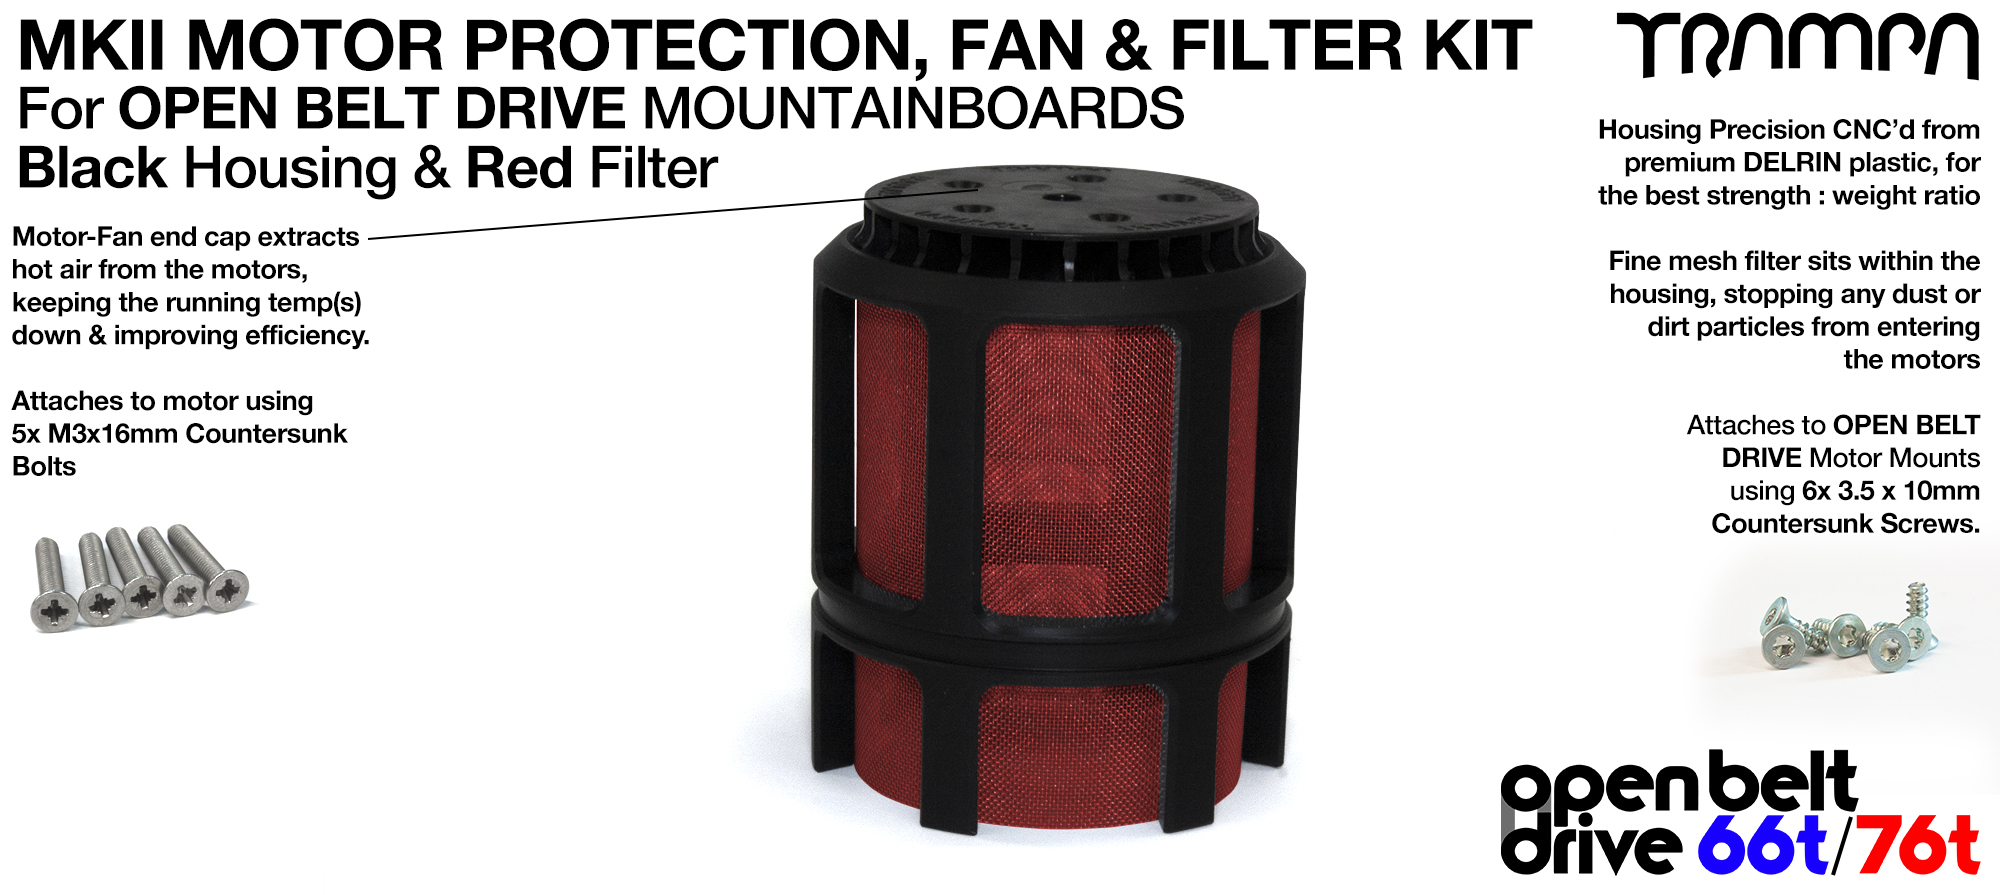 1x OBD MKII Motor protection Sleeve with RED Filter